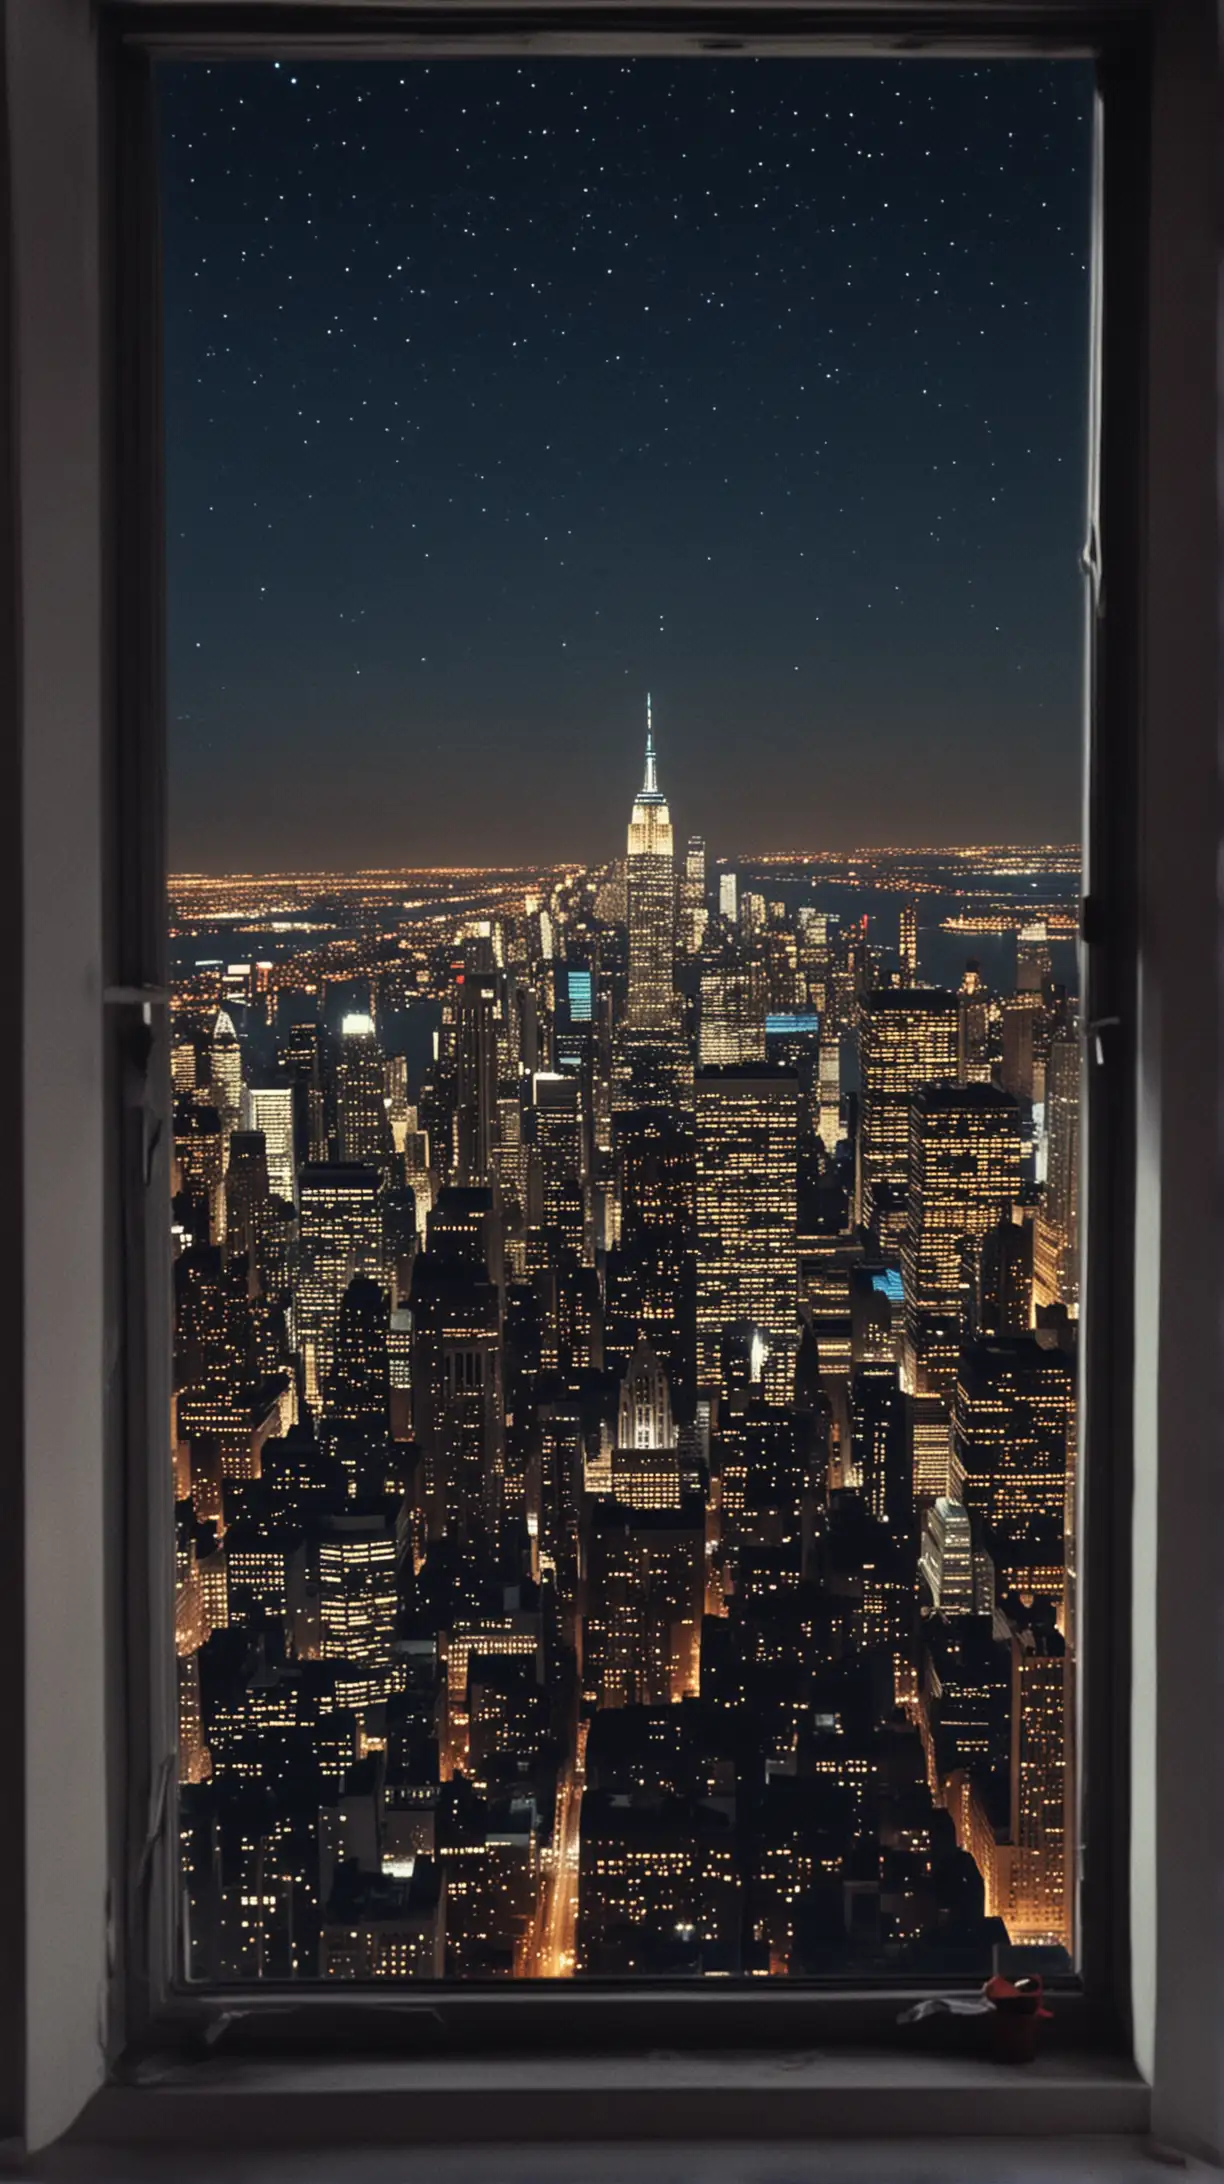 night view of the skyline city New York from a window 1980s stars in the sky
